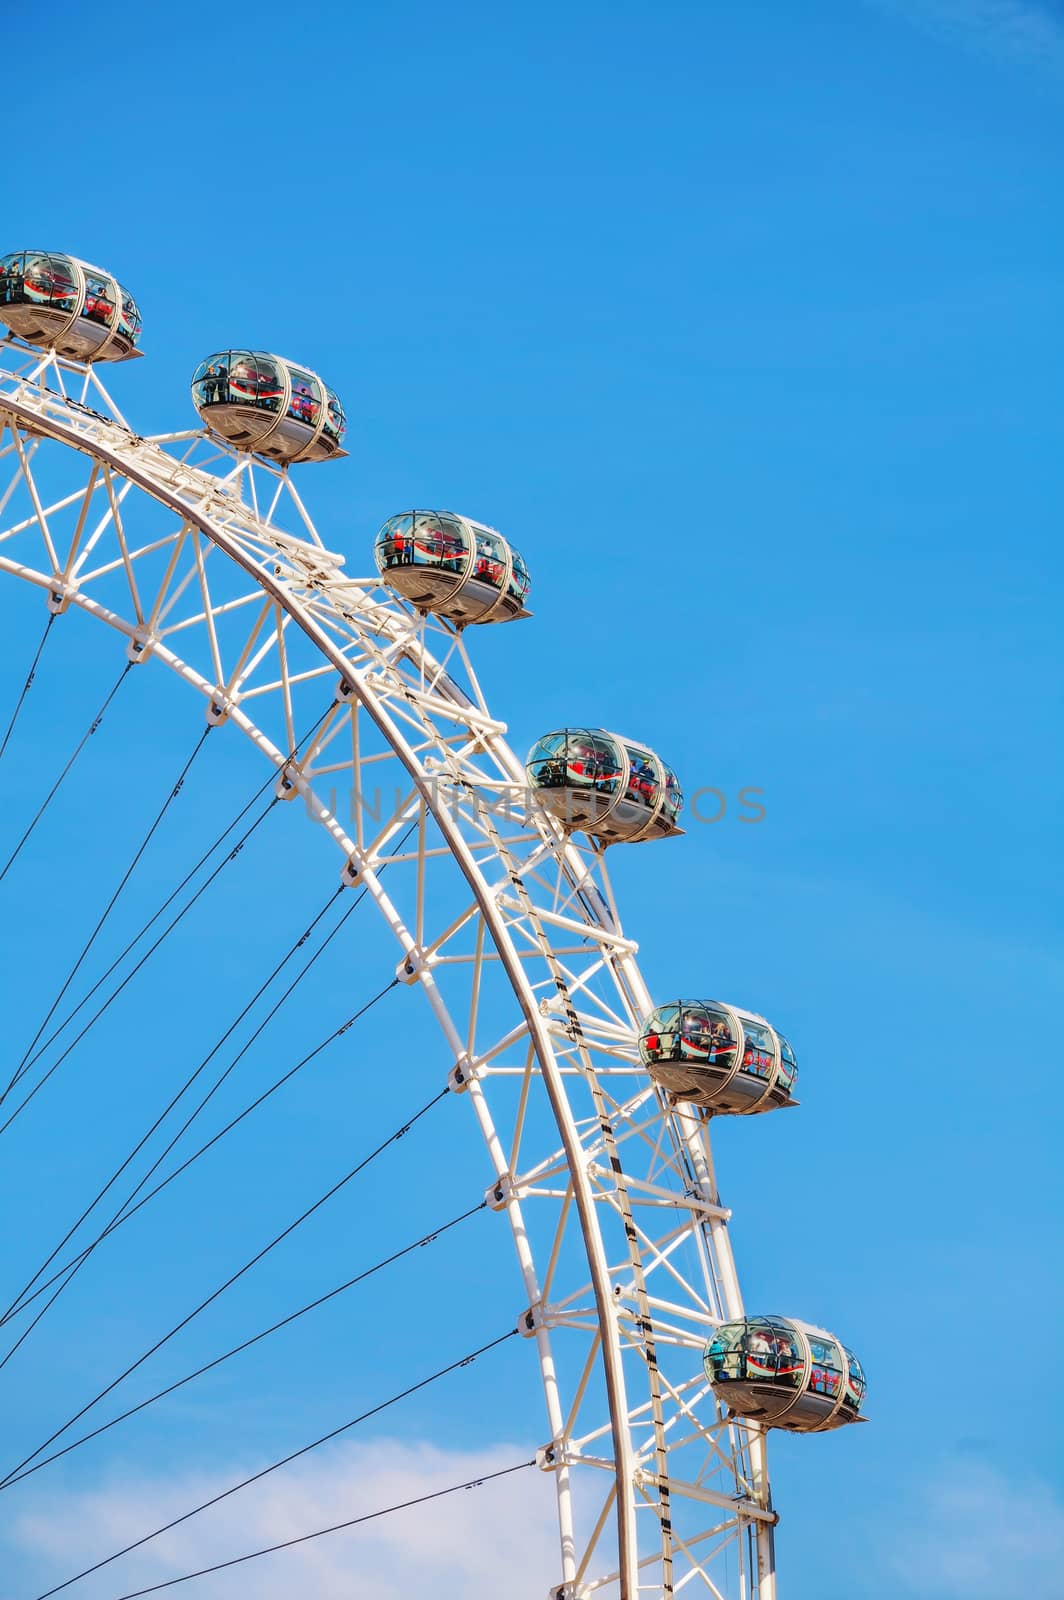 The London Eye Ferris wheel close up in London, UK by AndreyKr